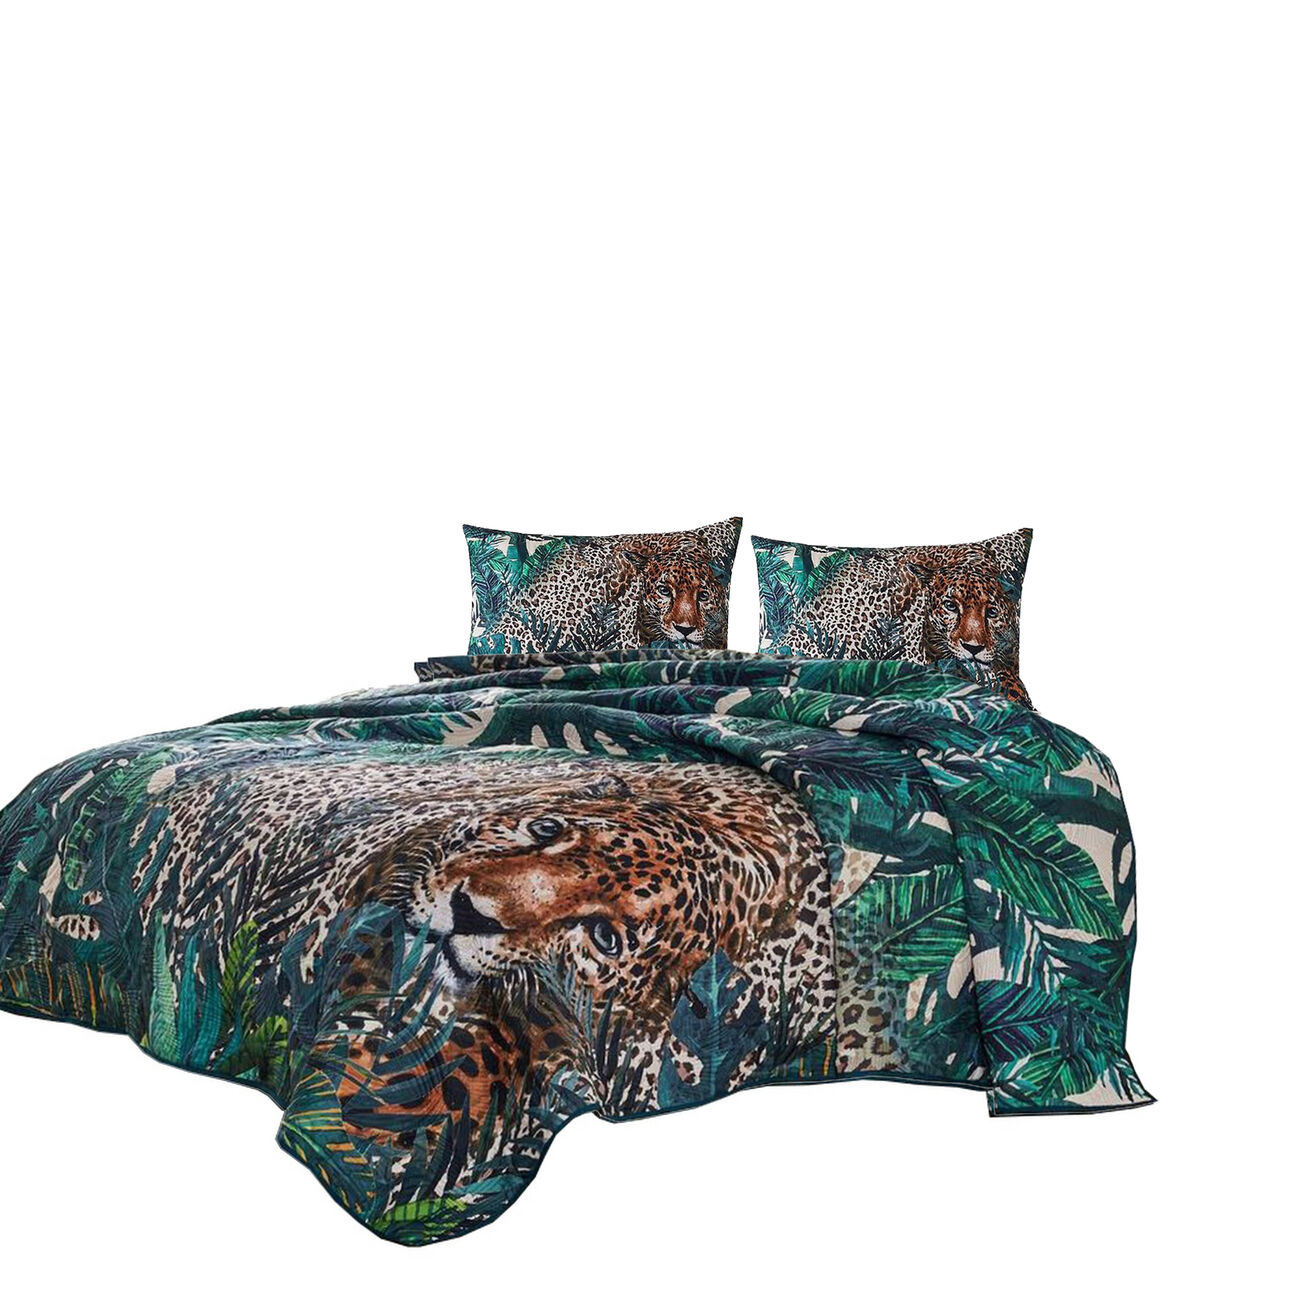 Nore 3 Piece King Quilt Set with Jungle Feline Print, Green